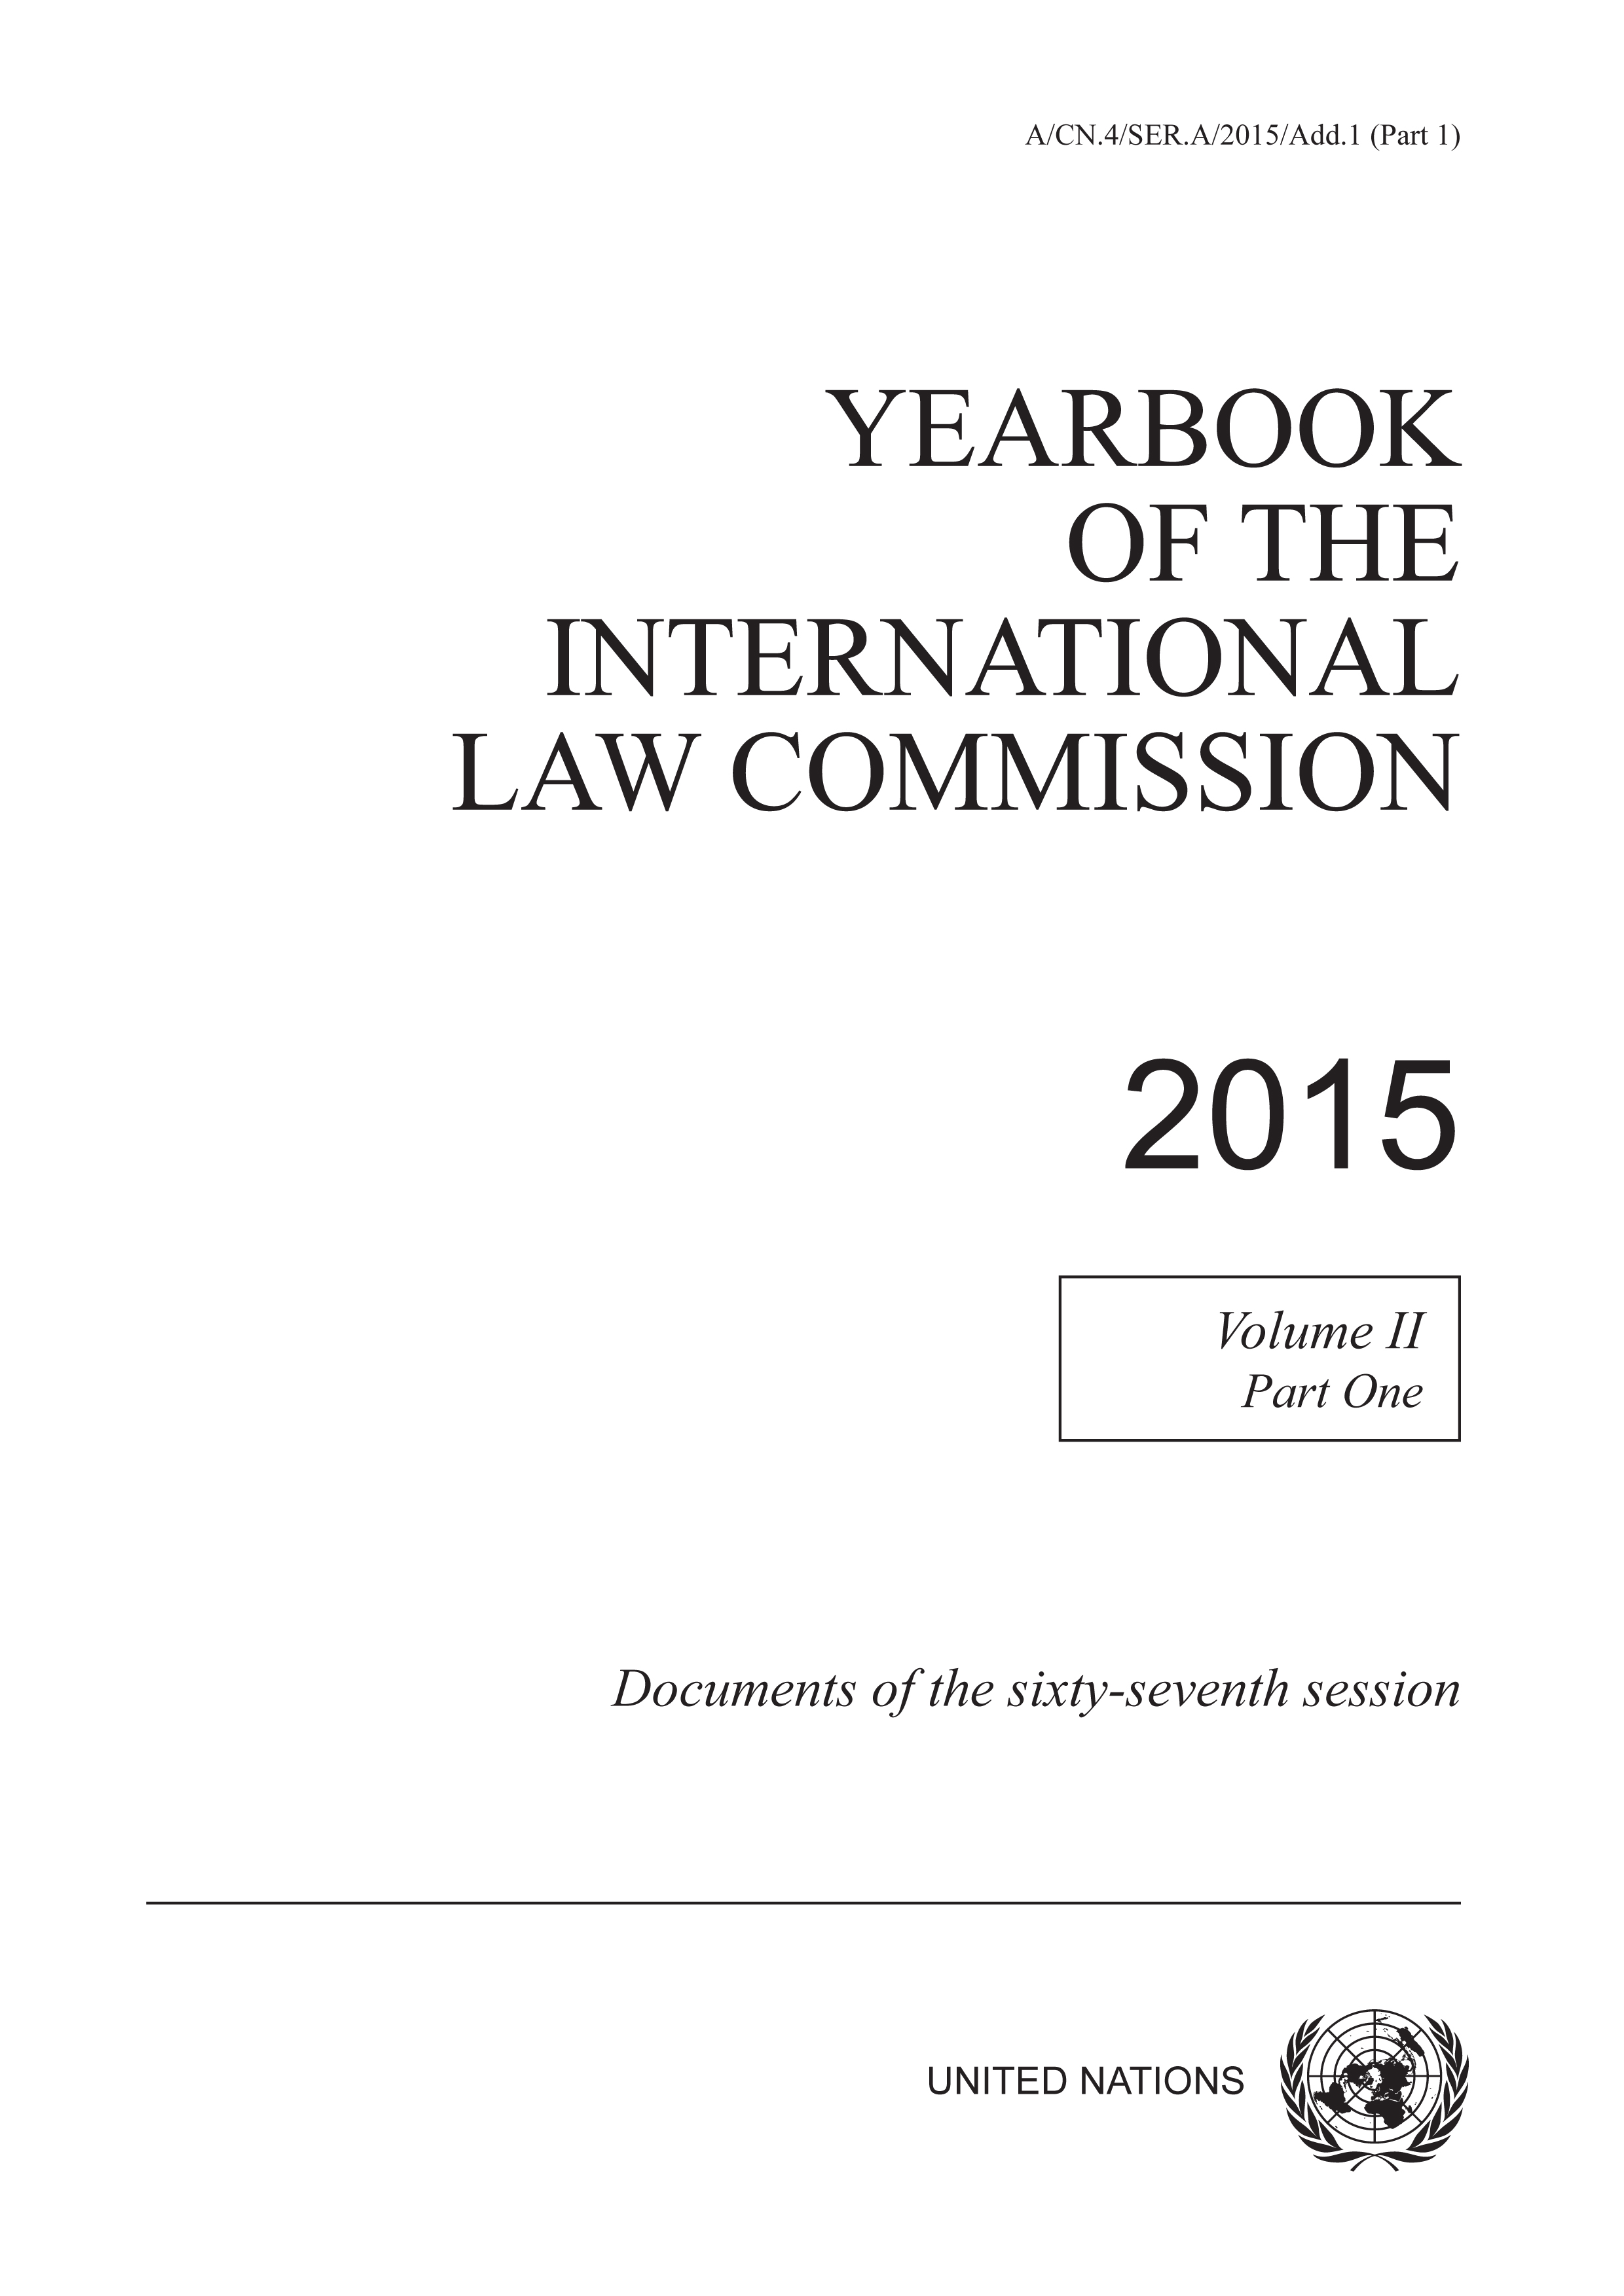 image of Yearbook of the International Law Commission 2015, Vol. II, Part 1